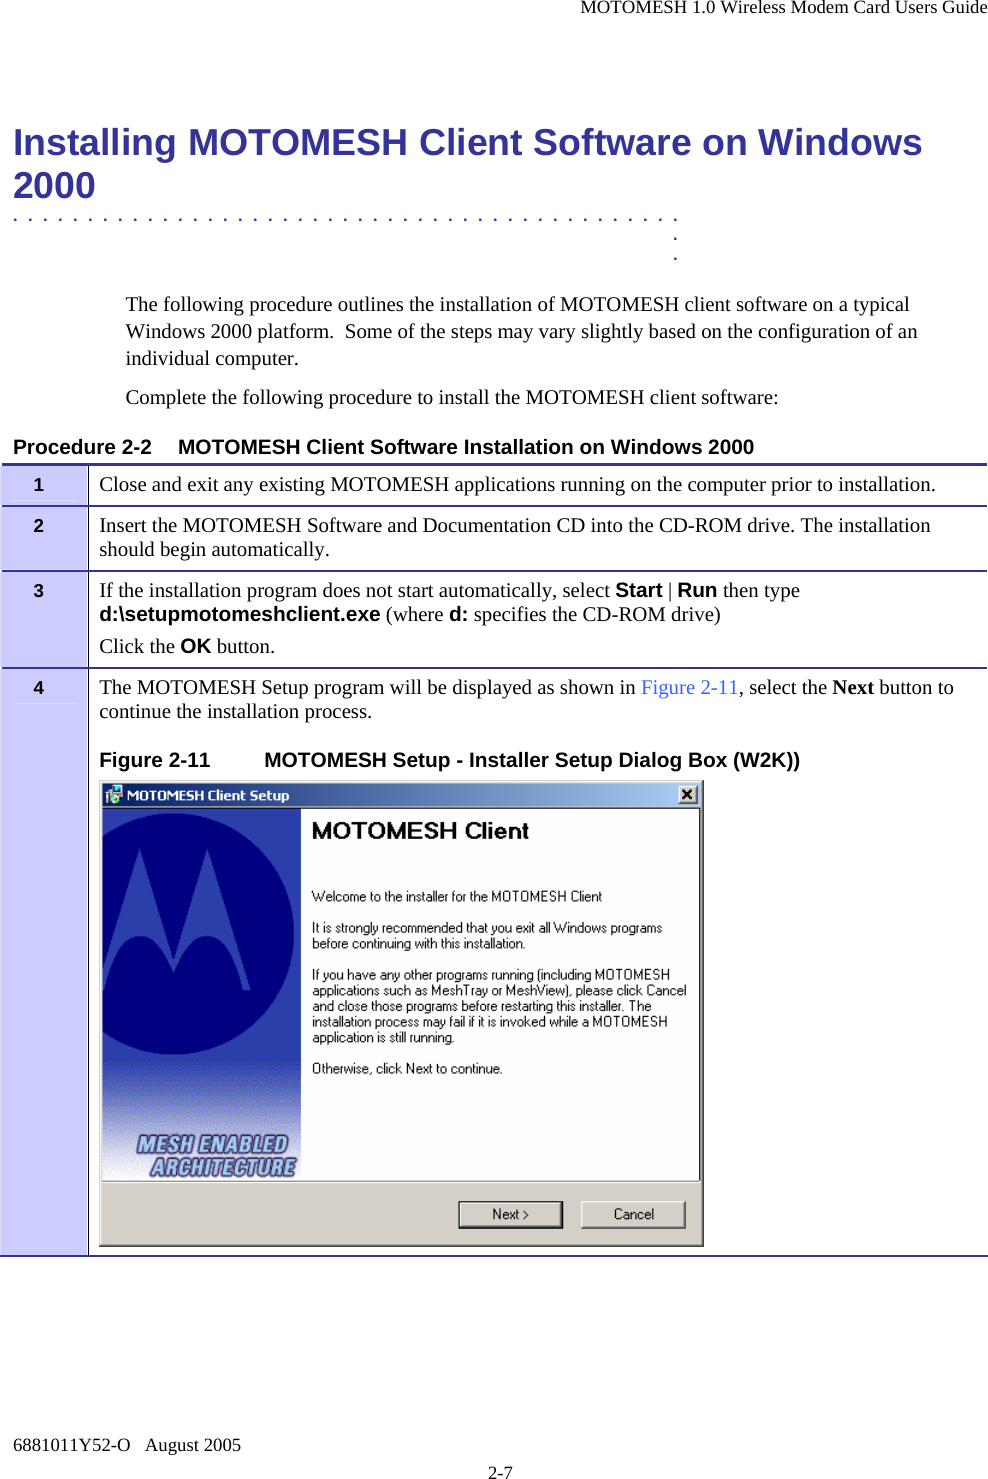 MOTOMESH 1.0 Wireless Modem Card Users Guide 6881011Y52-O   August 2005 2-7  Installing MOTOMESH Client Software on Windows 2000  .............................................  .  . The following procedure outlines the installation of MOTOMESH client software on a typical Windows 2000 platform.  Some of the steps may vary slightly based on the configuration of an individual computer. Complete the following procedure to install the MOTOMESH client software: Procedure 2-2  MOTOMESH Client Software Installation on Windows 2000 1   Close and exit any existing MOTOMESH applications running on the computer prior to installation. 2   Insert the MOTOMESH Software and Documentation CD into the CD-ROM drive. The installation should begin automatically. 3   If the installation program does not start automatically, select Start | Run then type d:\setupmotomeshclient.exe (where d: specifies the CD-ROM drive)   Click the OK button. 4   The MOTOMESH Setup program will be displayed as shown in Figure 2-11, select the Next button to continue the installation process. Figure 2-11  MOTOMESH Setup - Installer Setup Dialog Box (W2K))  